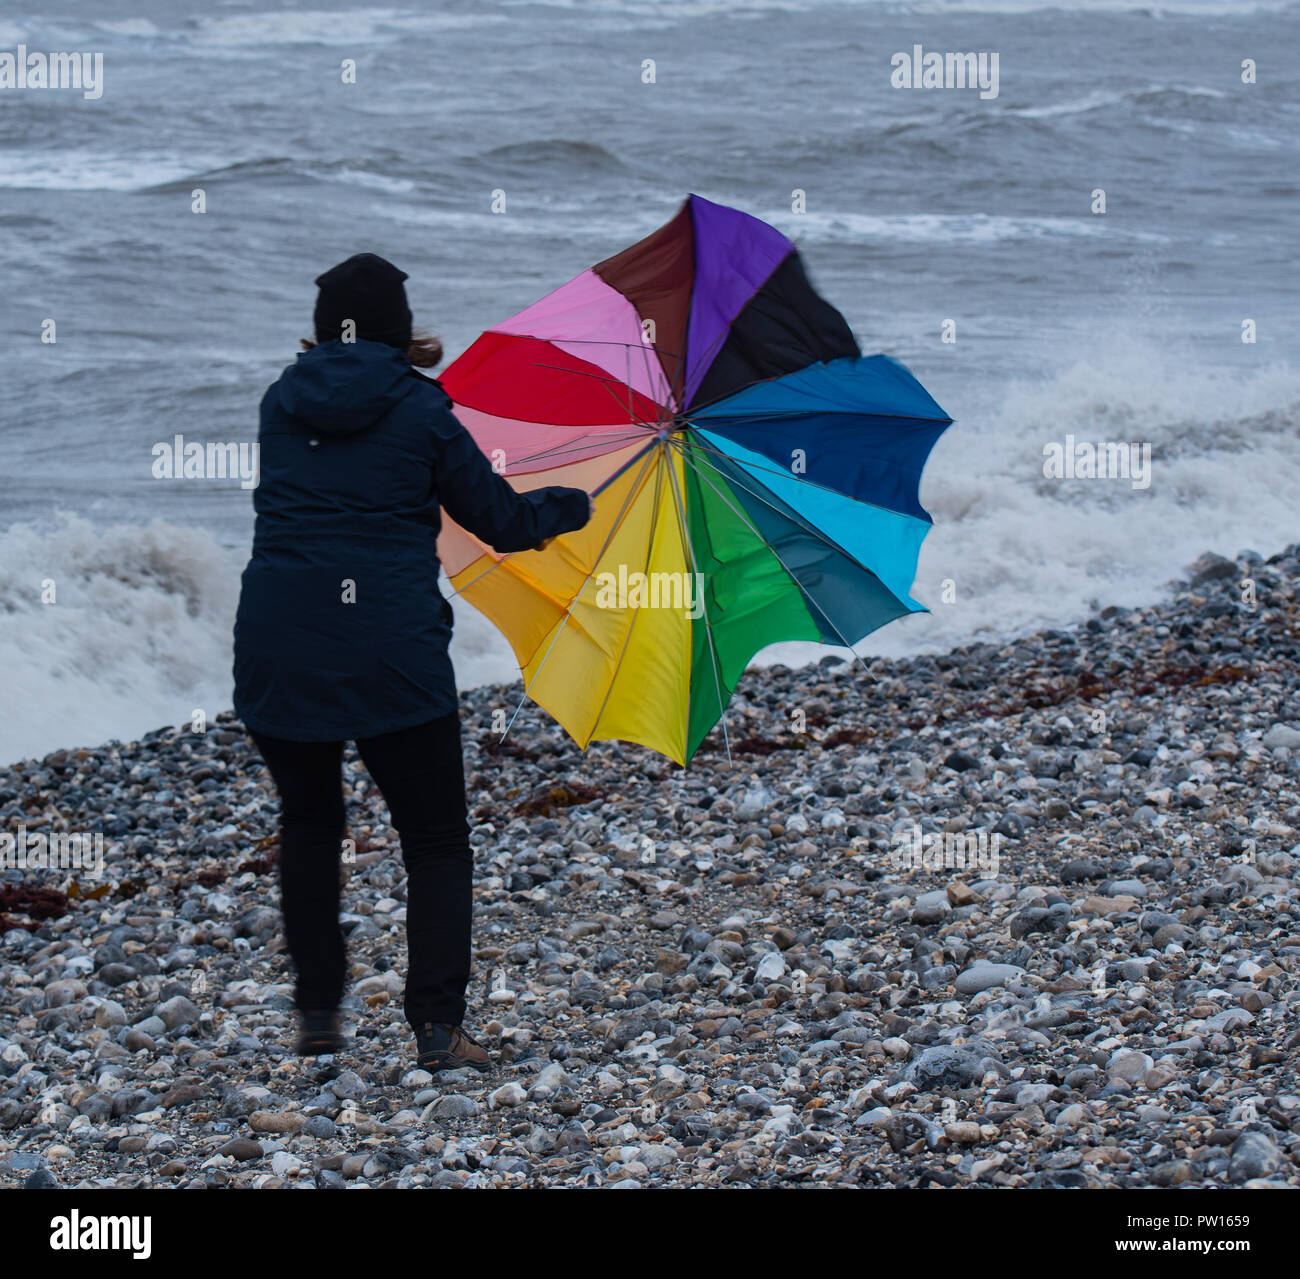 Lyme Regis, Dorset, UK. 11th October 2018.  UK Weather:   A woman battles with an umbrella on the beach as gusty high winds and outbreaks of rain hit the coastal resort of Lyme Regis ahead of Storm Callum.  Credit: Celia McMahon/Alamy Live News Stock Photo